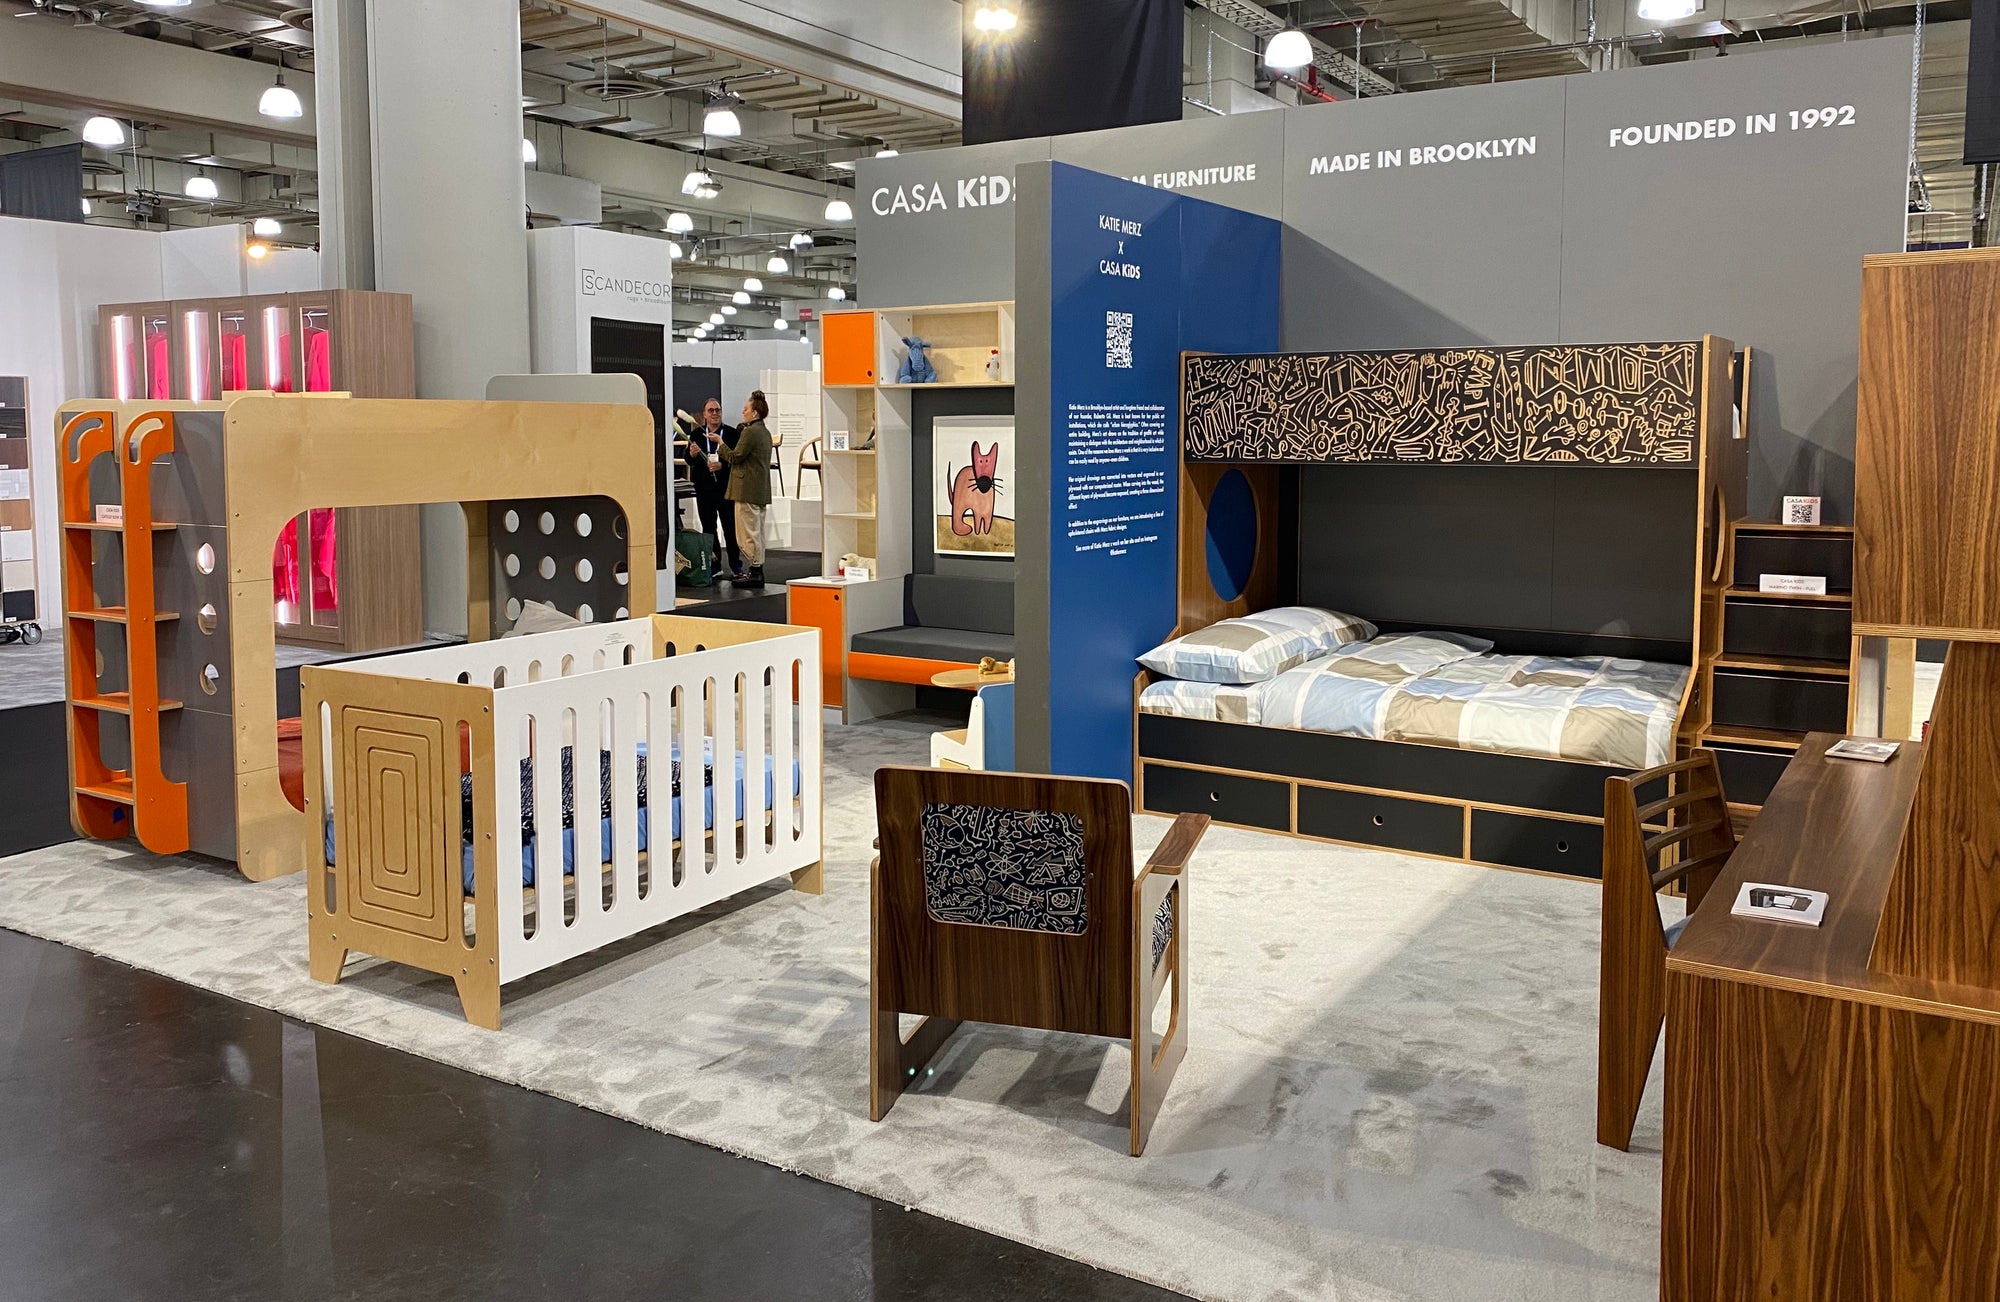 This modular furniture system designed for kids is built to be